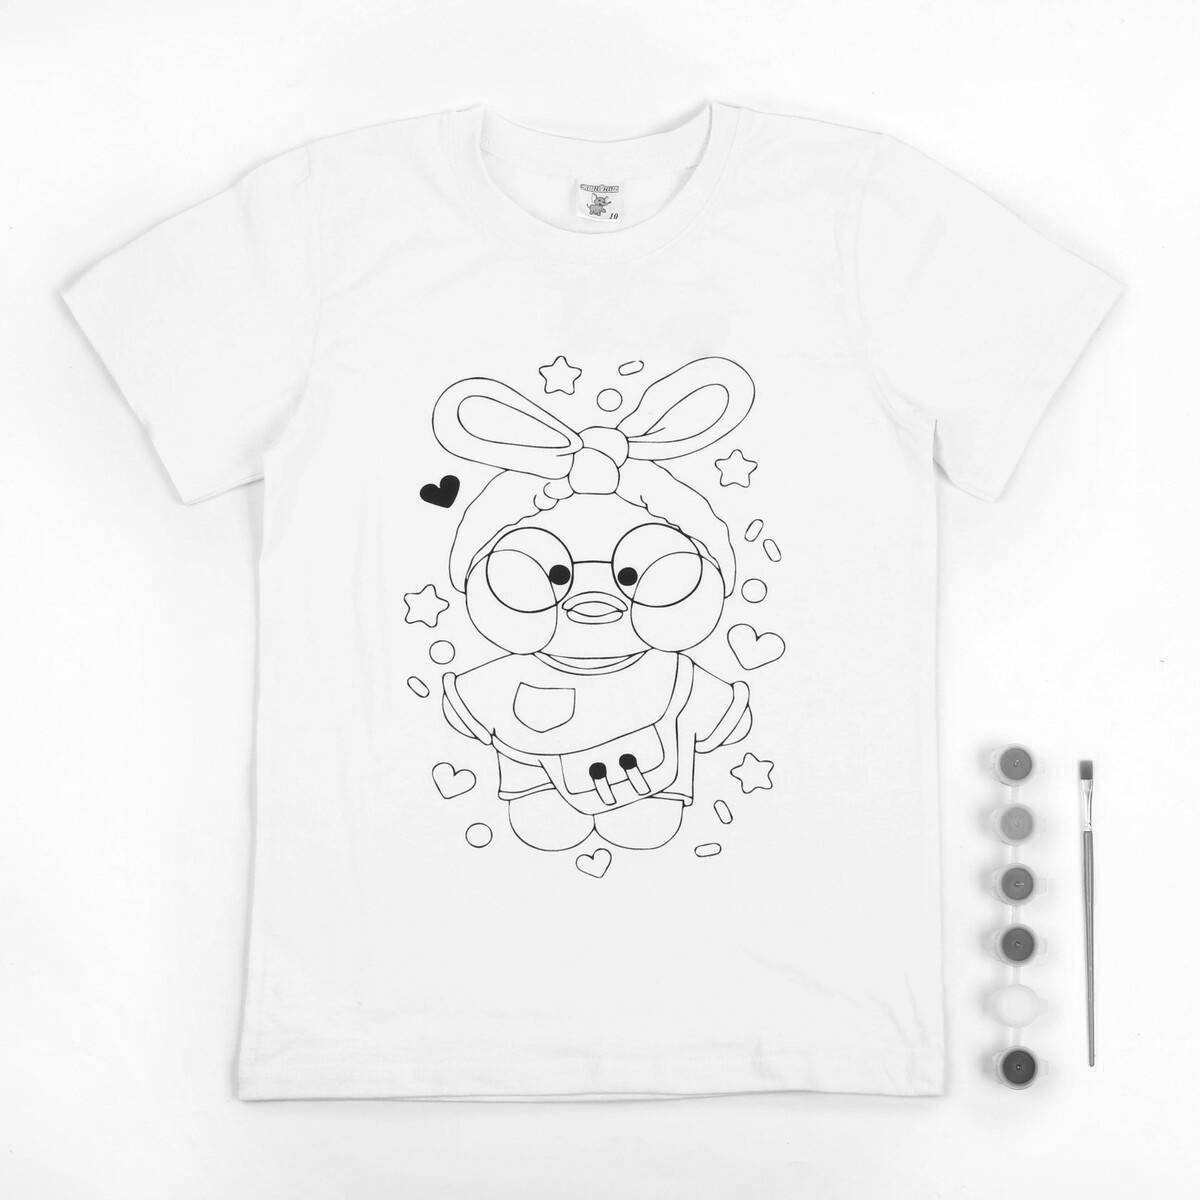 Coloring book humorous t-shirt with a kitten